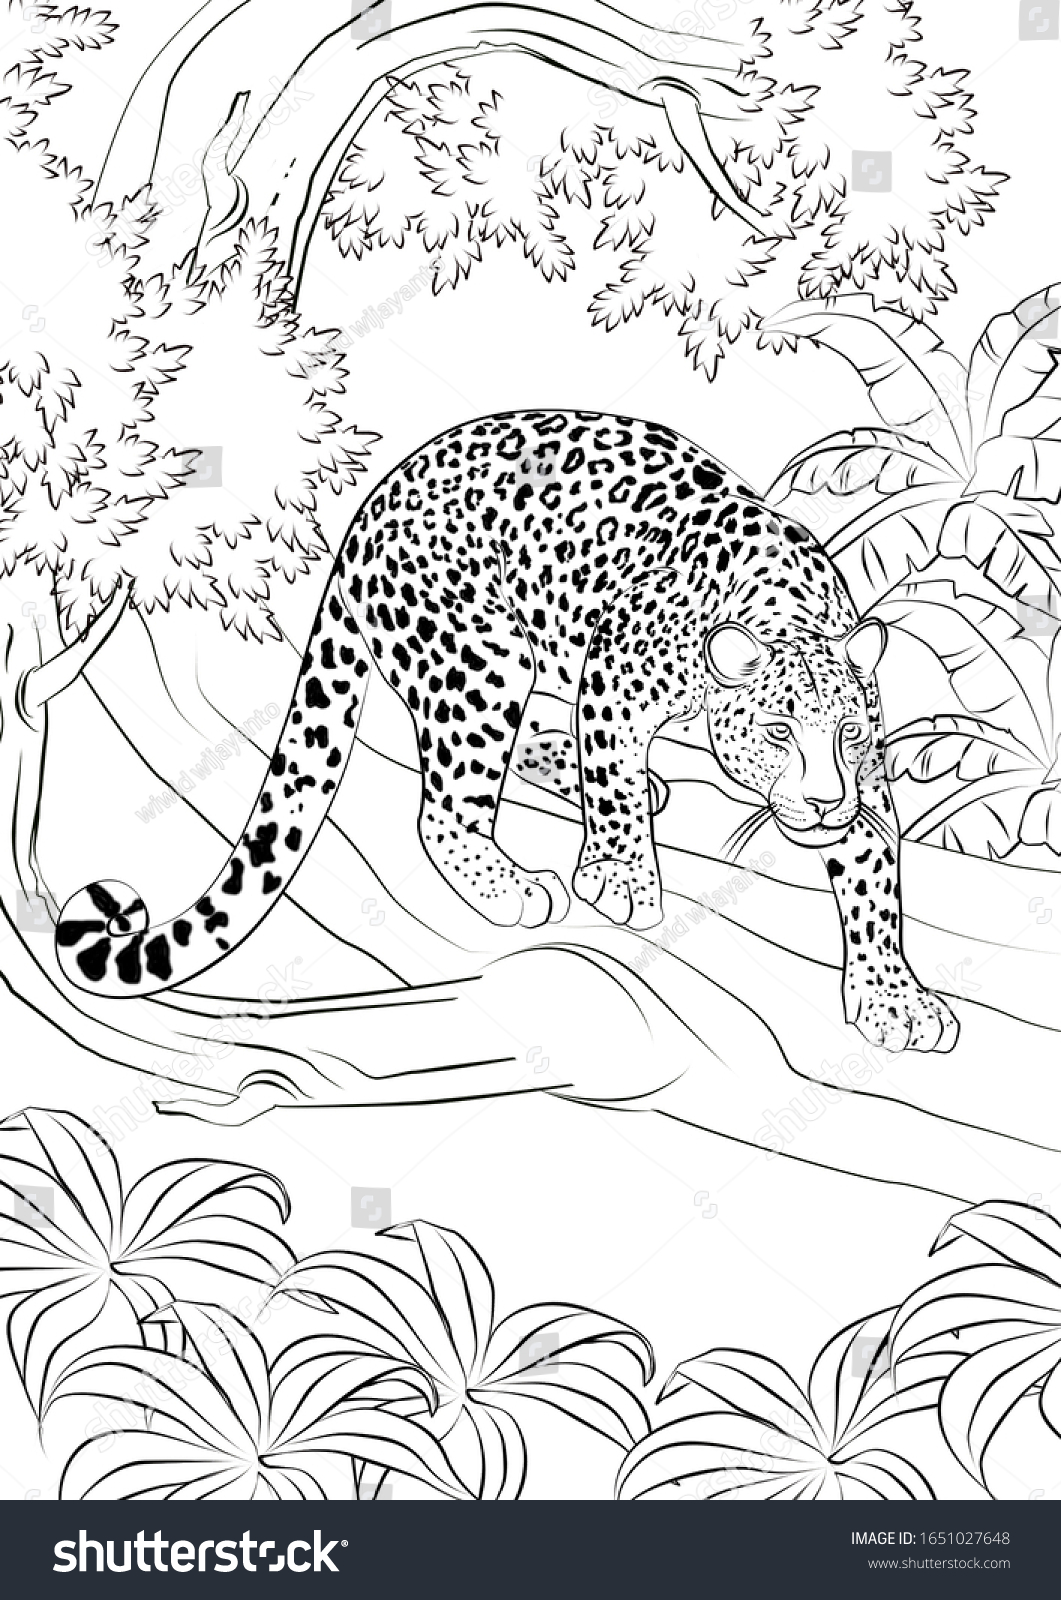 Leopard Realistic Animal Coloring Pages Stock Illustration ...